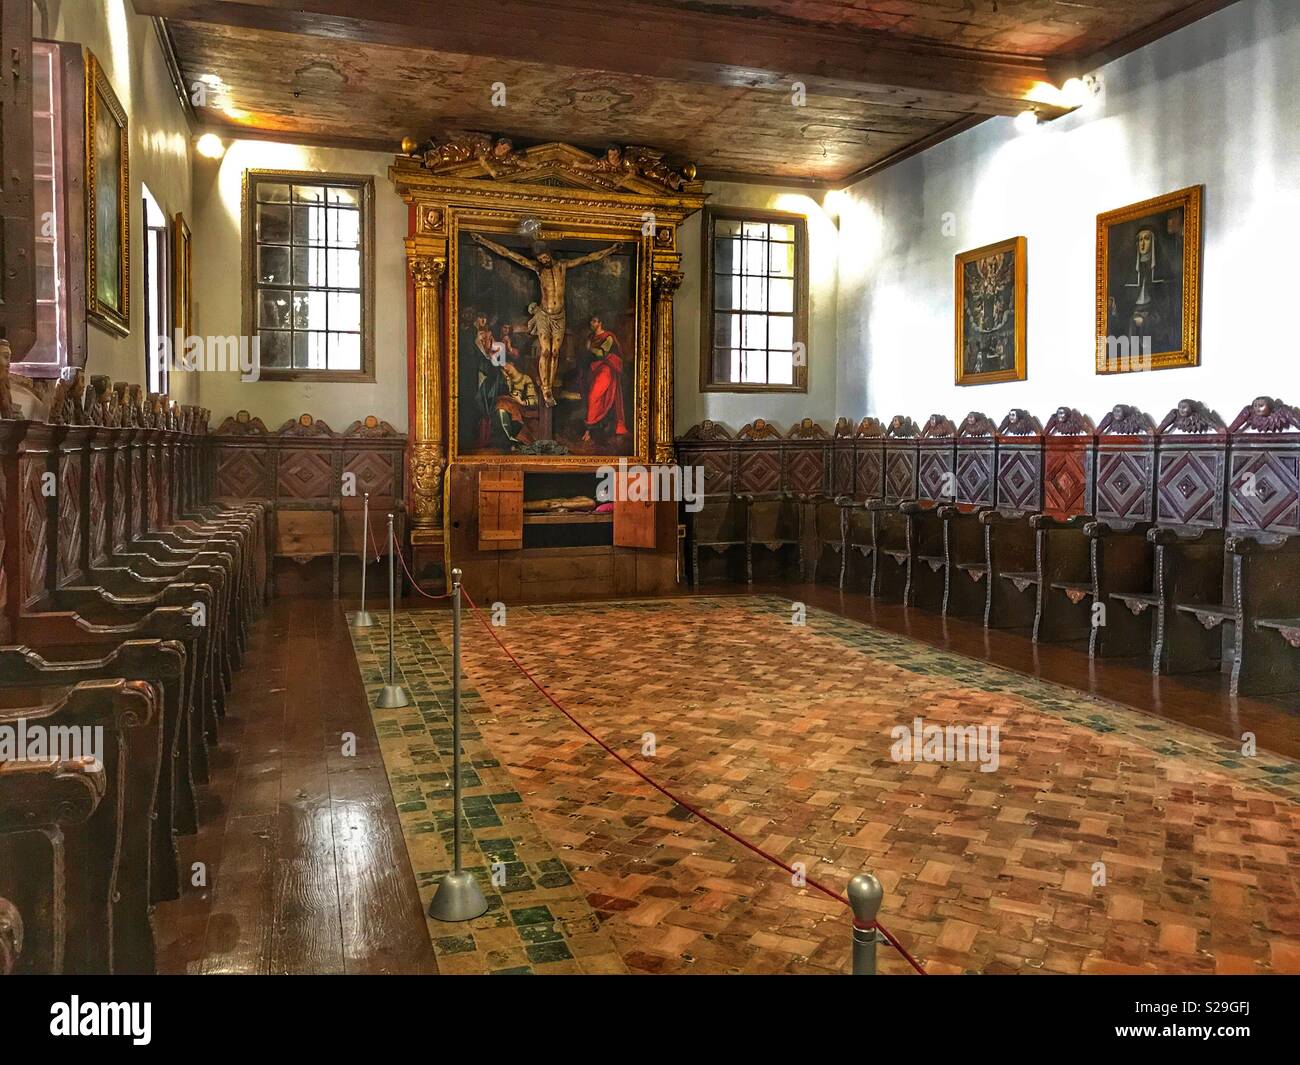 Santa Clara Convent, built for Franciscan Sisters in the 16th Century and still in use today, Funchal, Madeira, Portugal, Hand painted wooden angels and choir stalls line the walls of a chapel Stock Photo